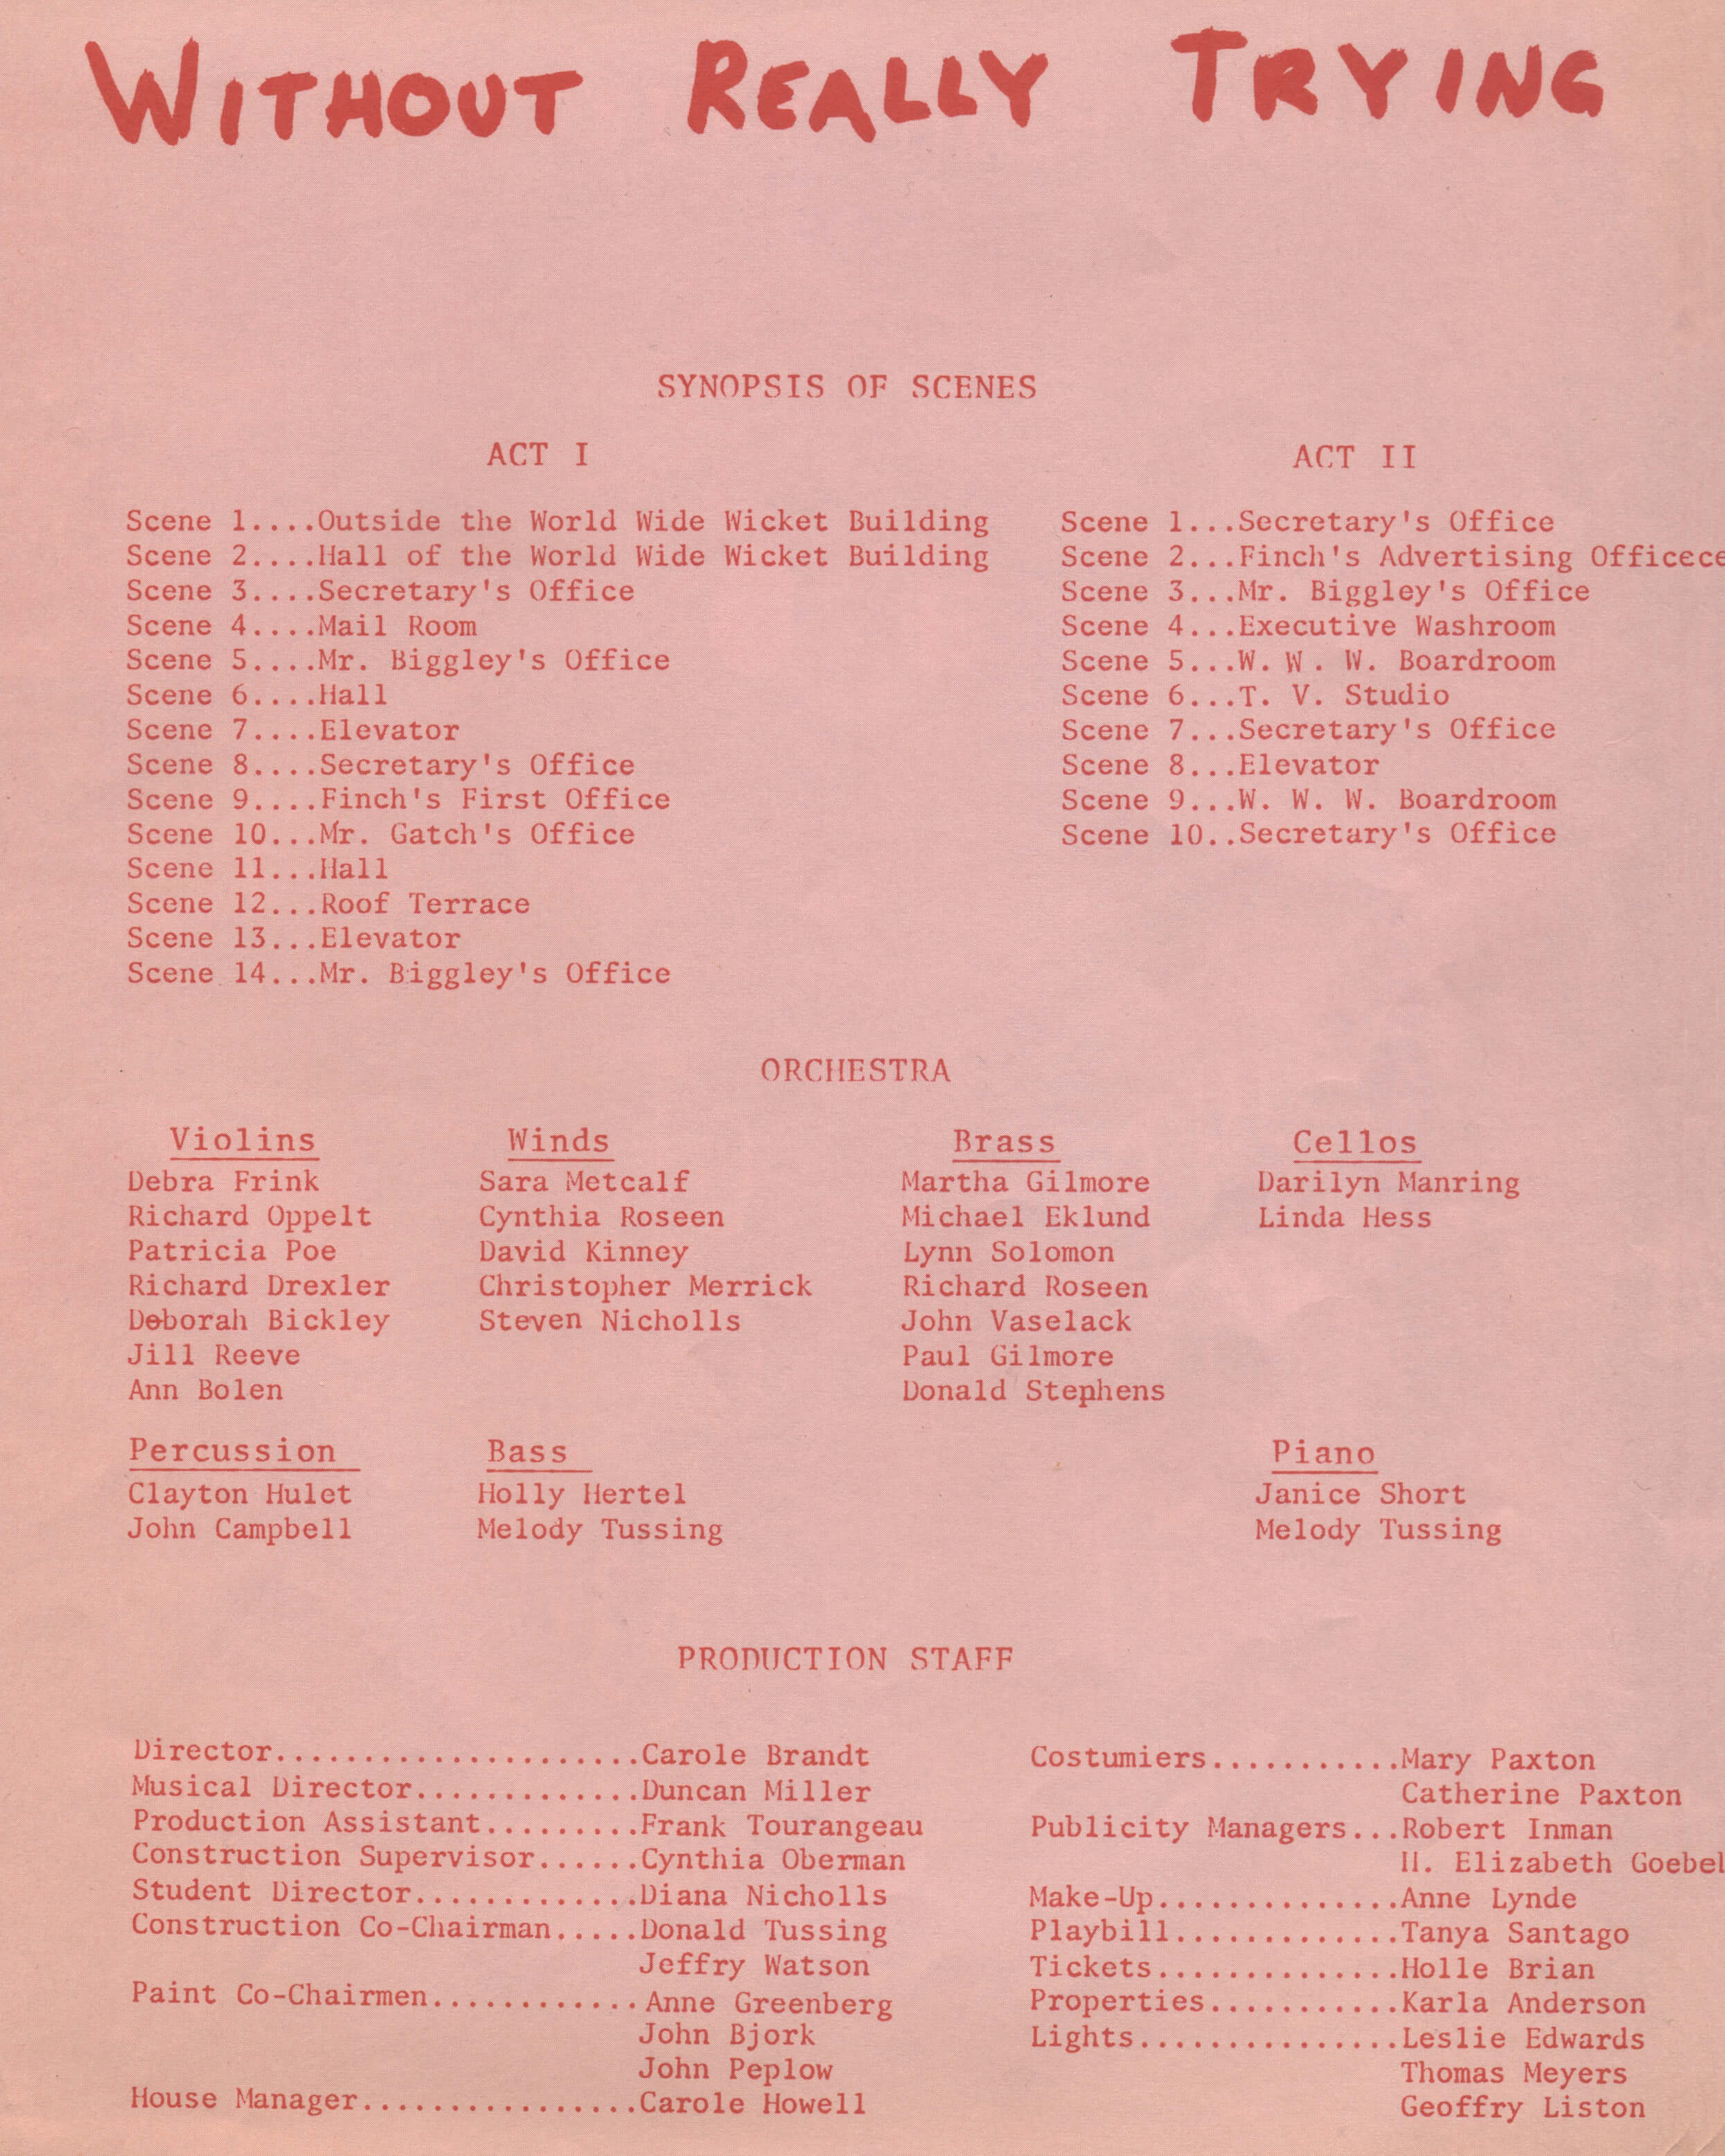 Inside cover of a high school play bill. Title at the top reads "Without Really Trying".